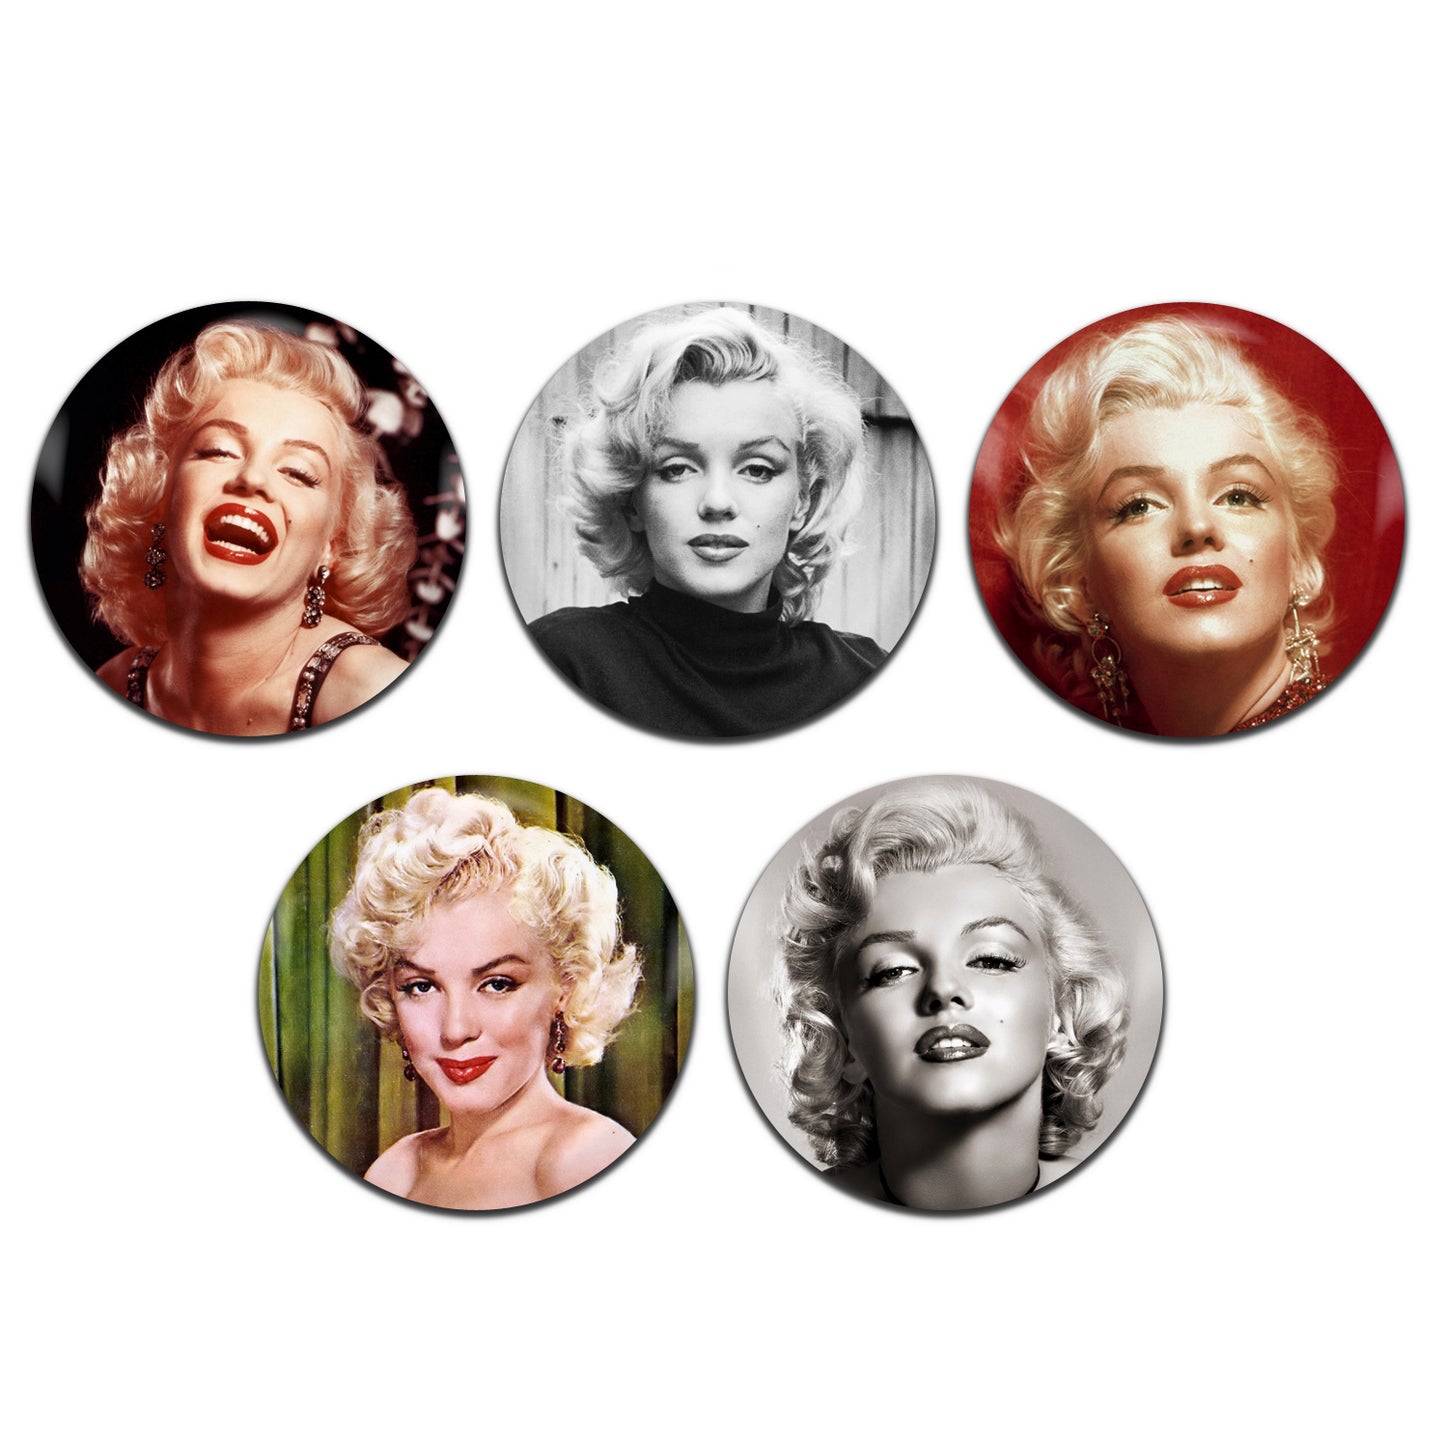 Marilyn Monroe Classic Movie Film Actress 50's 60's 25mm / 1 Inch D-Pin Button Badges (5x Set)